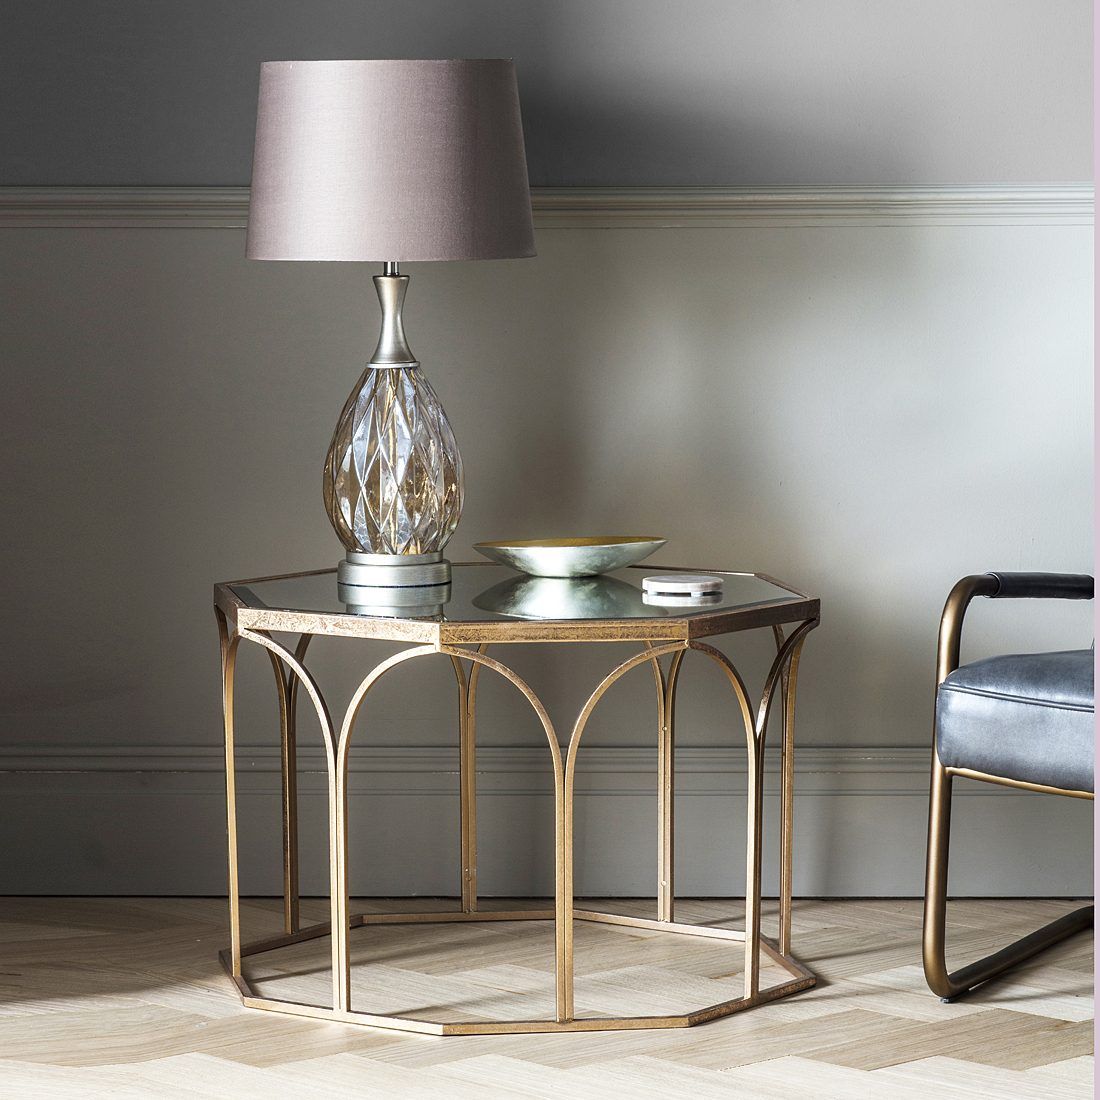 Copper Mirror Topped Coffee Table | Primrose & Plum Inside Antique Brass Aluminum Round Console Tables (View 13 of 20)